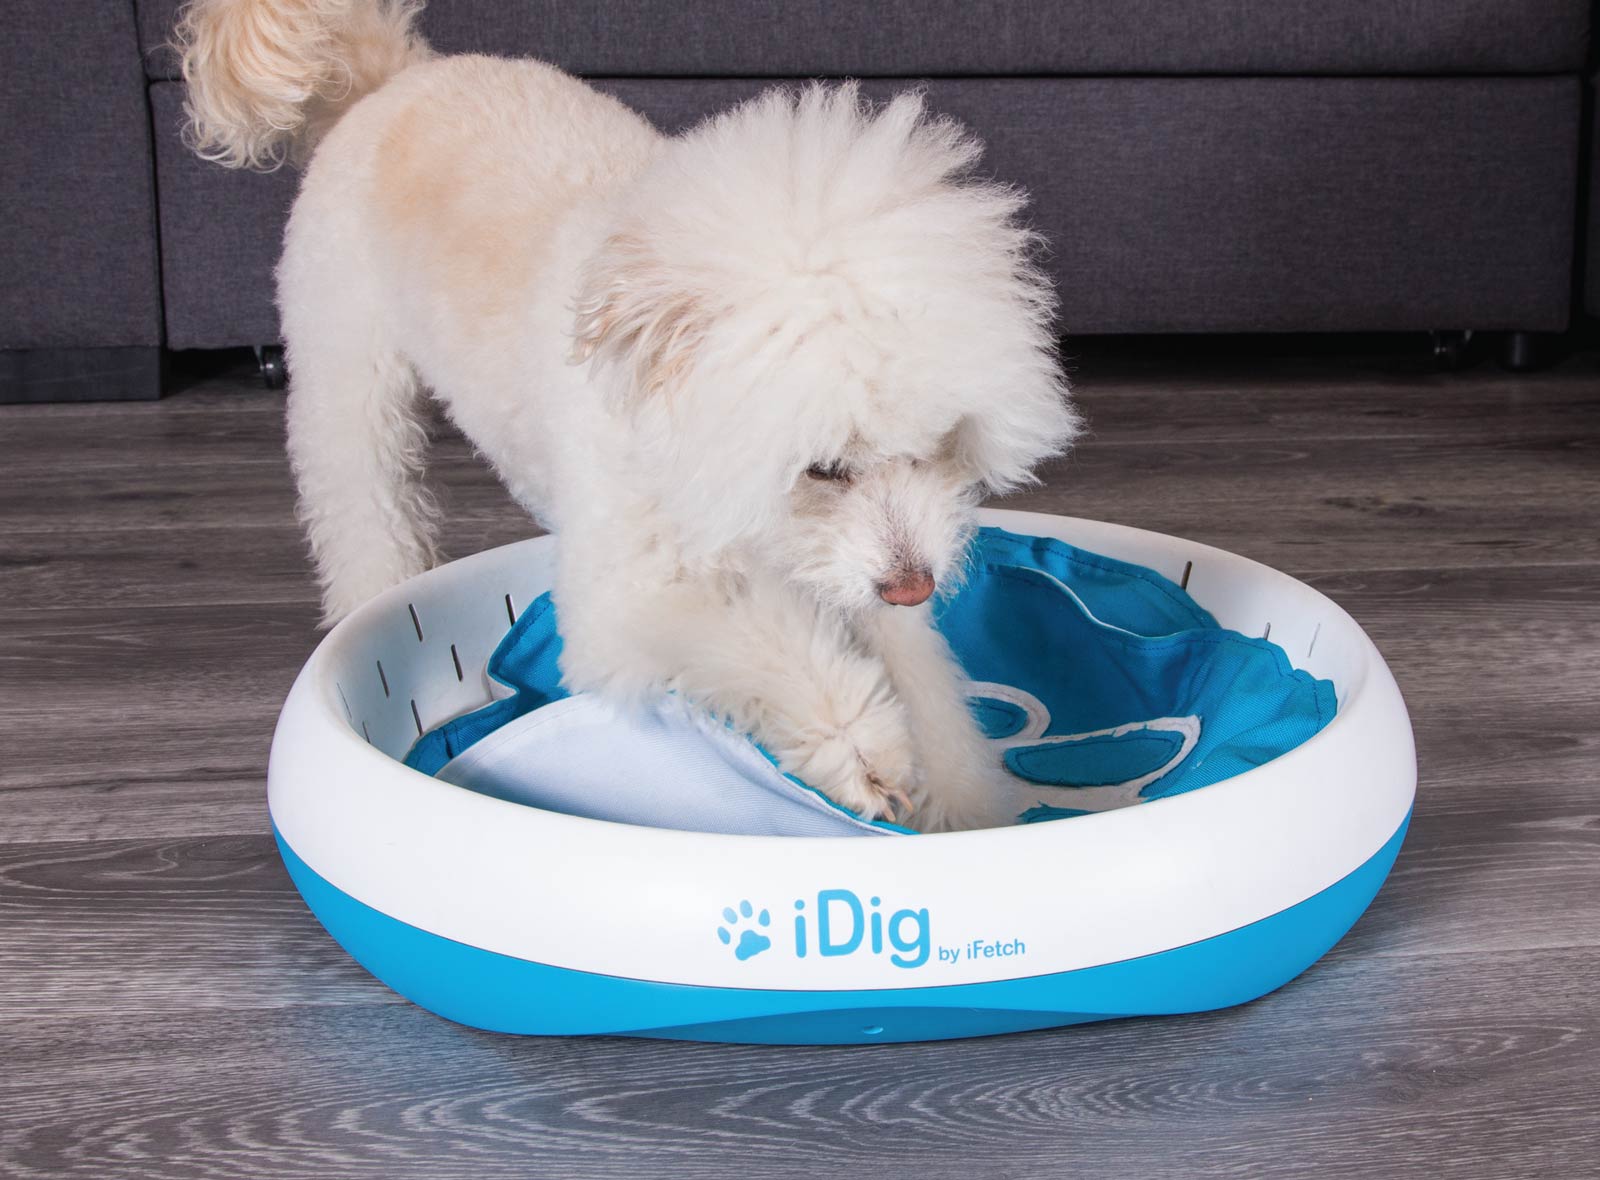 Pet Supplies : iDig Go Digging Toy from iFetch Digging Dog Breeds